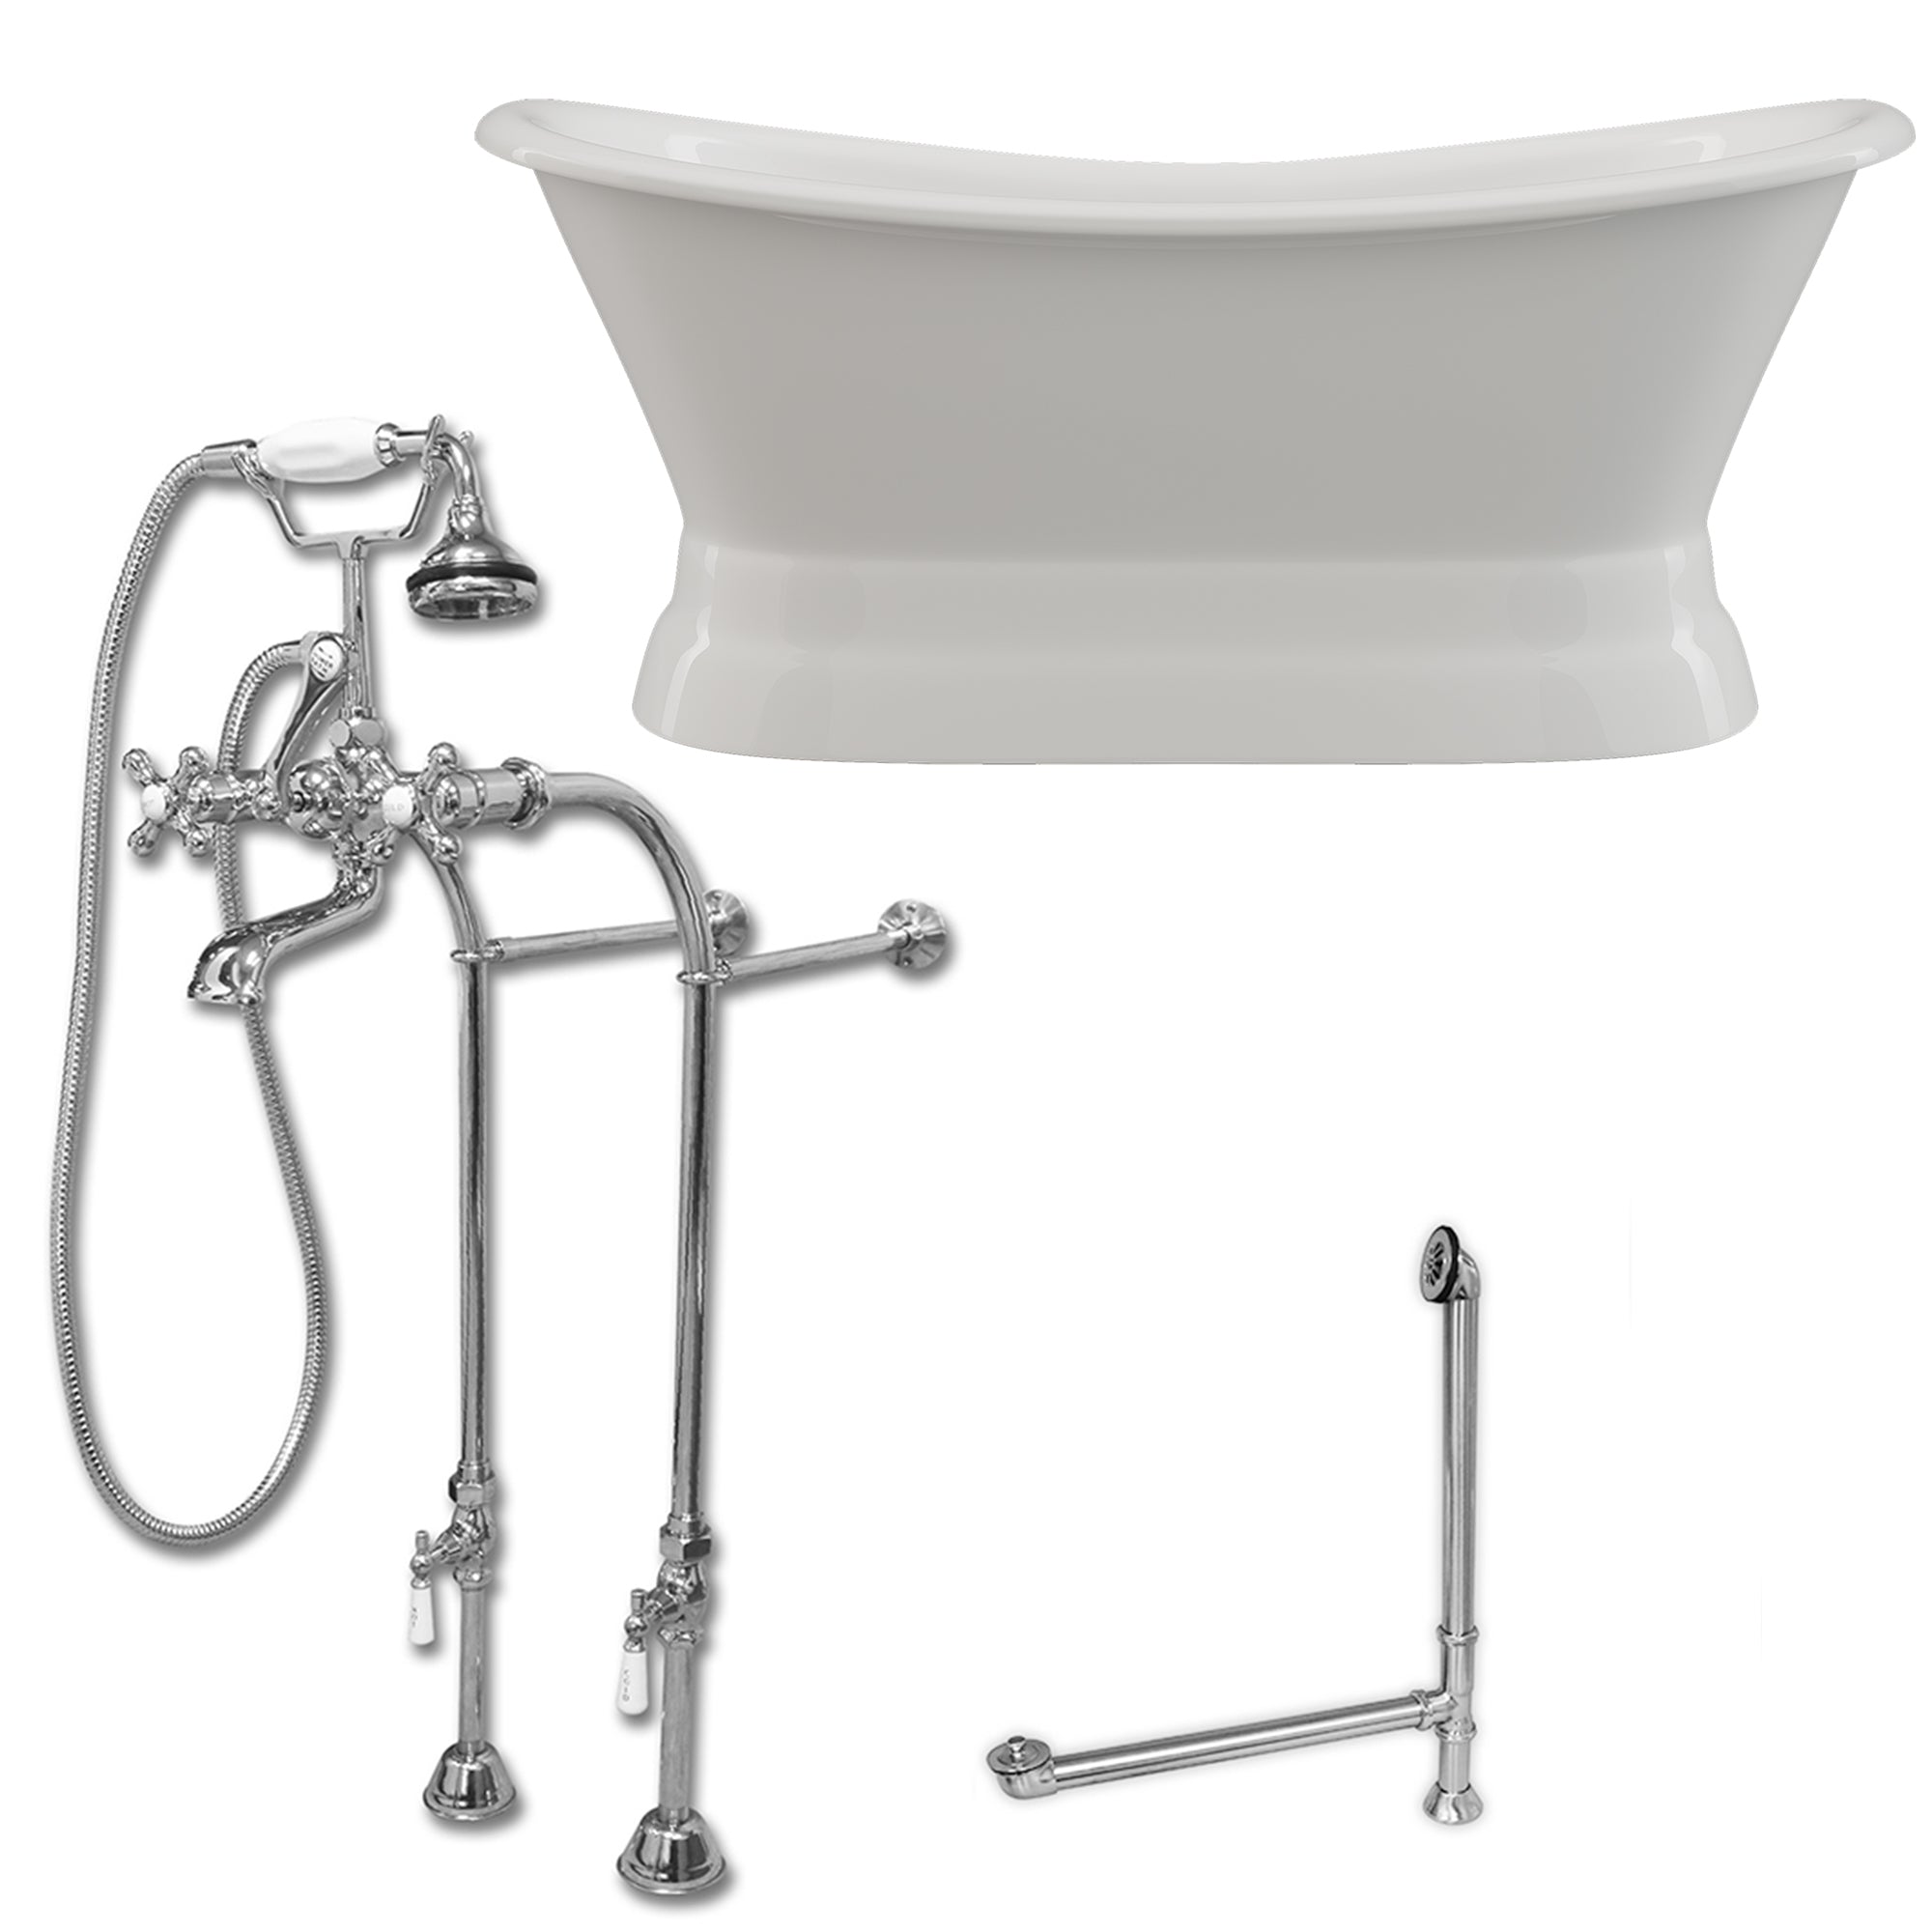 Cambridge Plumbing Double Slipper Cast Iron Pedestal Soaking Tub (Porcelain interior and white paint exterior) and Free-Standing Plumbing Package (Brushed nickel) DES-PED-398463-PKG-NH - Vital Hydrotherapy